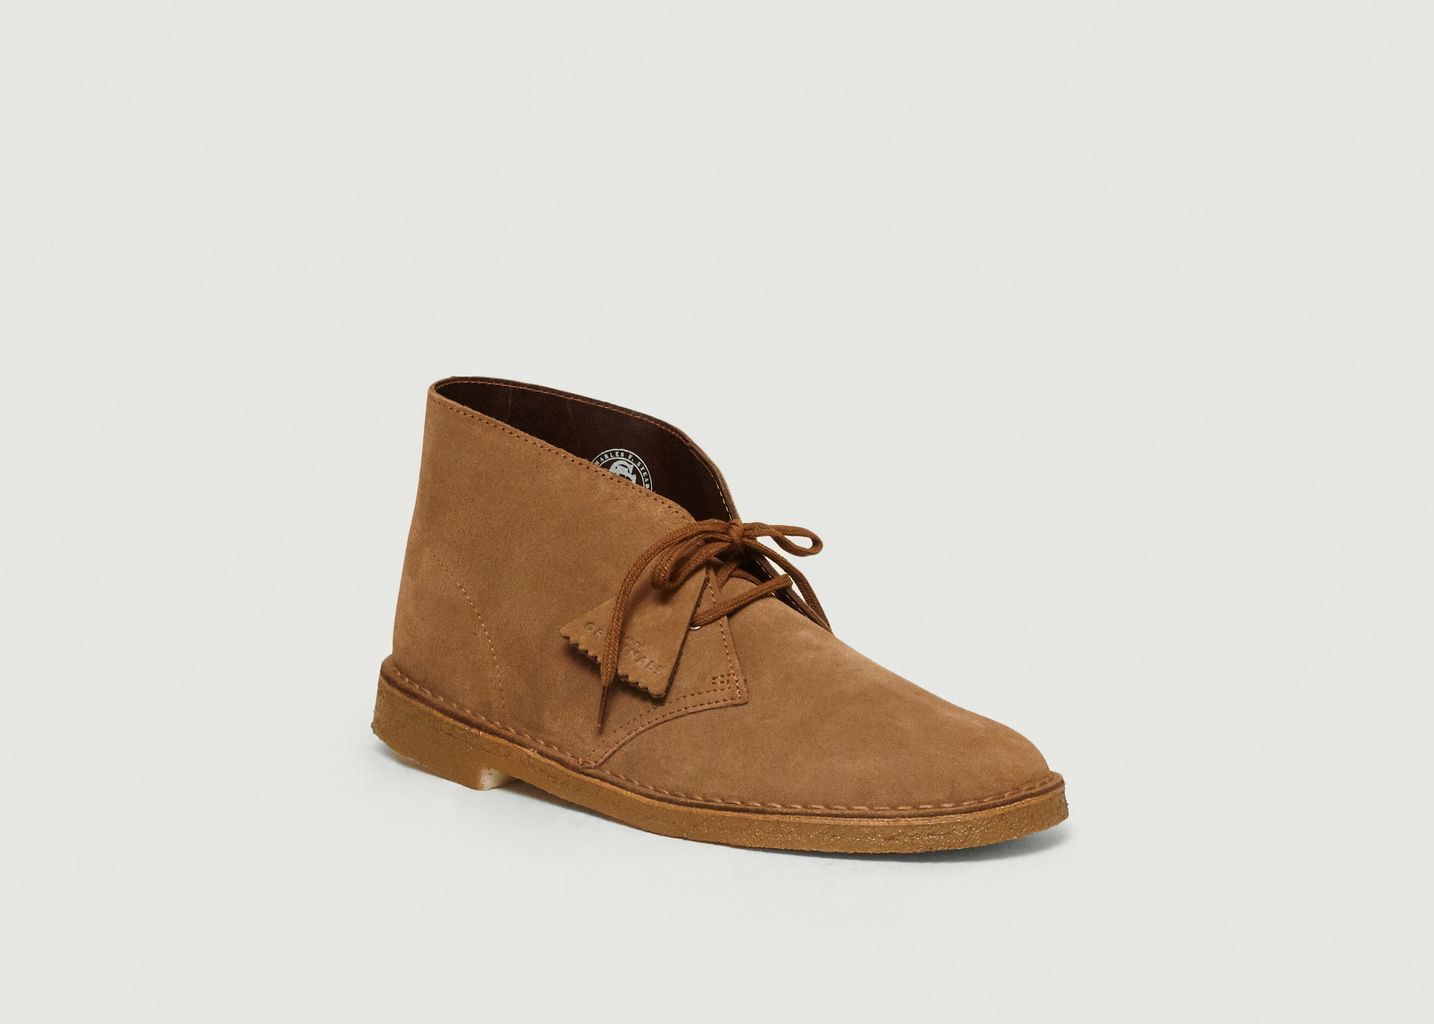 clarks boots new zealand